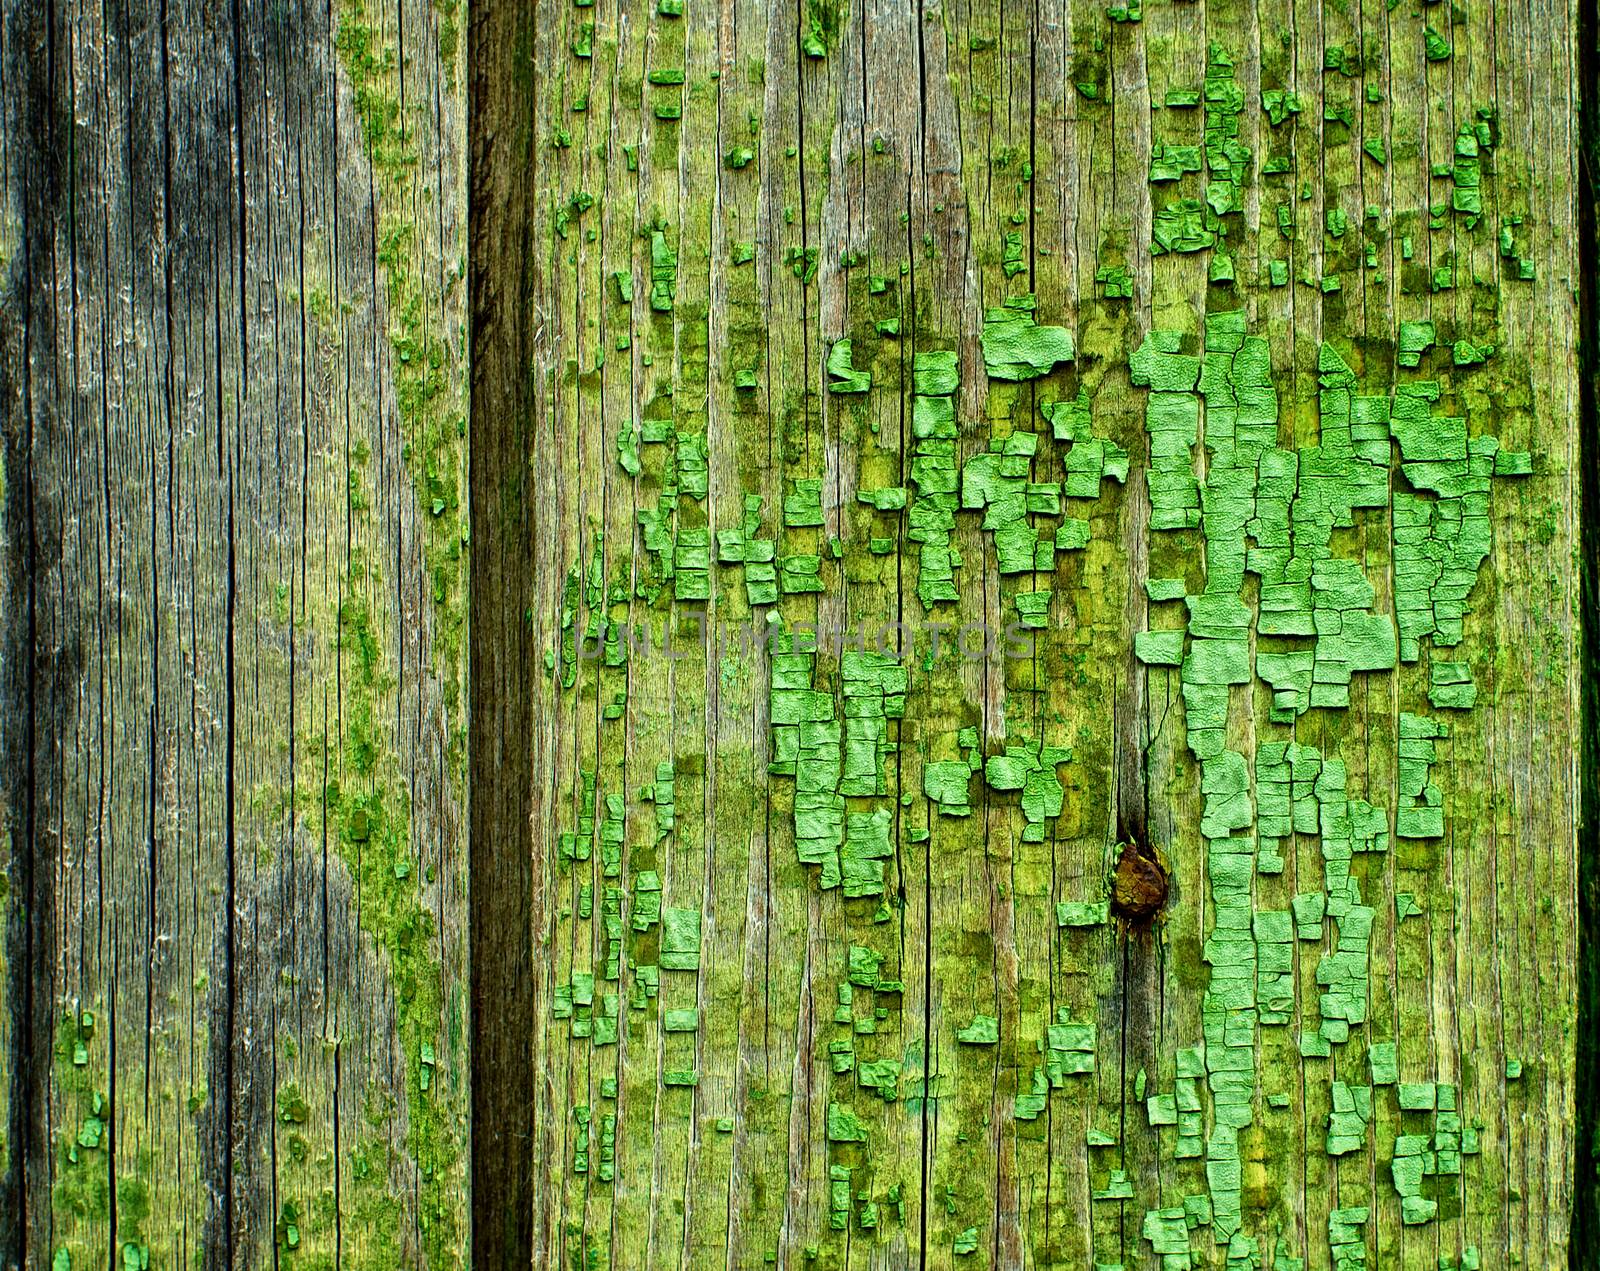 Natural Weathered Wooden Background with Timber Knots Old Nails and Cracked Paint closeup